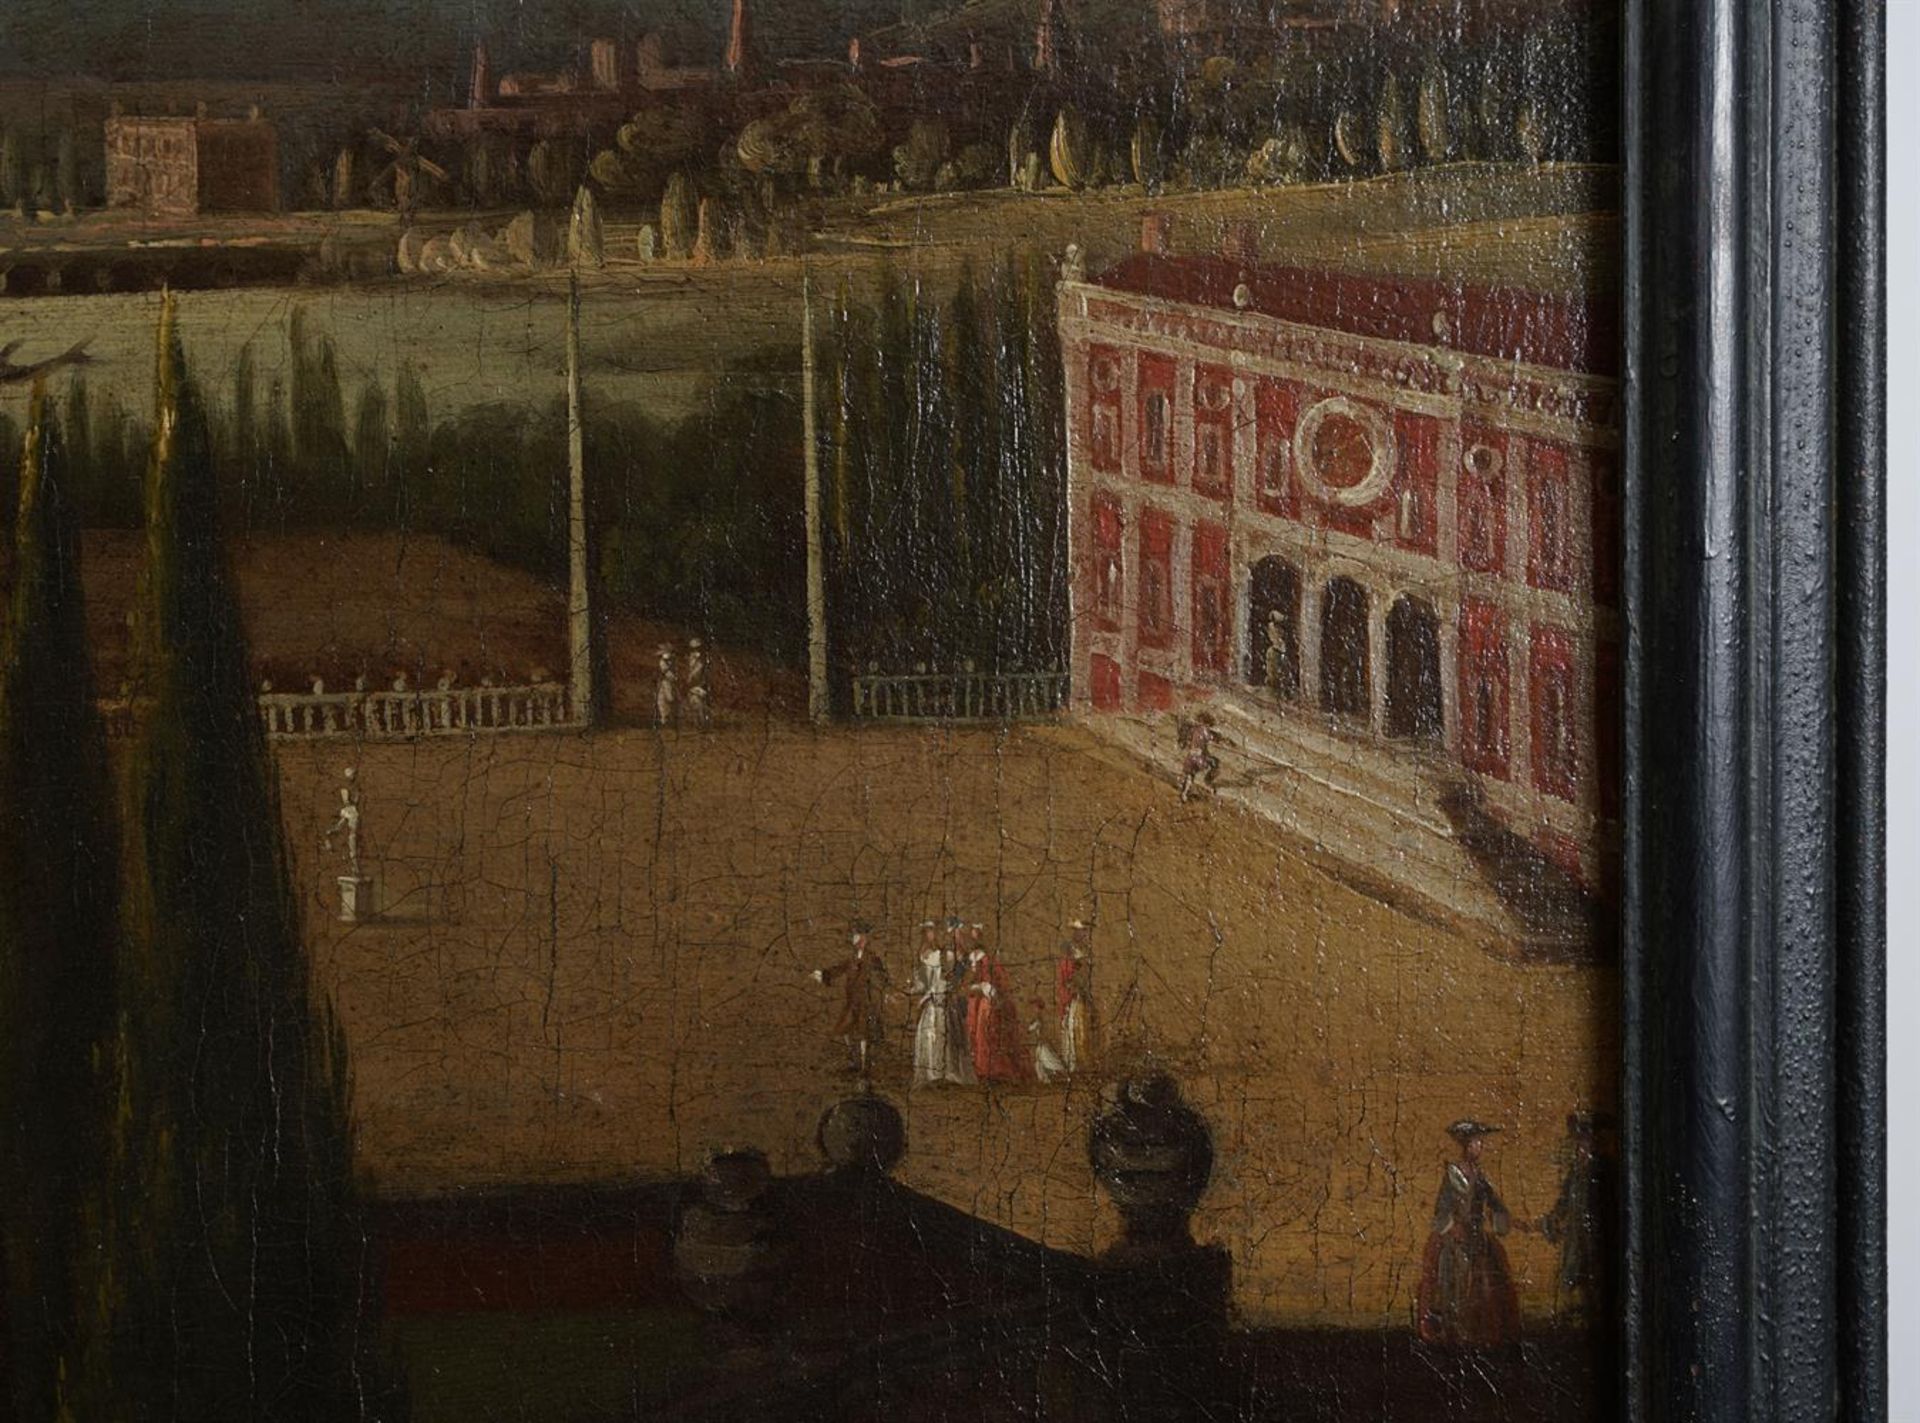 ANGLO-DUTCH SCHOOL (18TH CENTURY), FIGURES IN A FORMAL GARDEN - Image 4 of 6